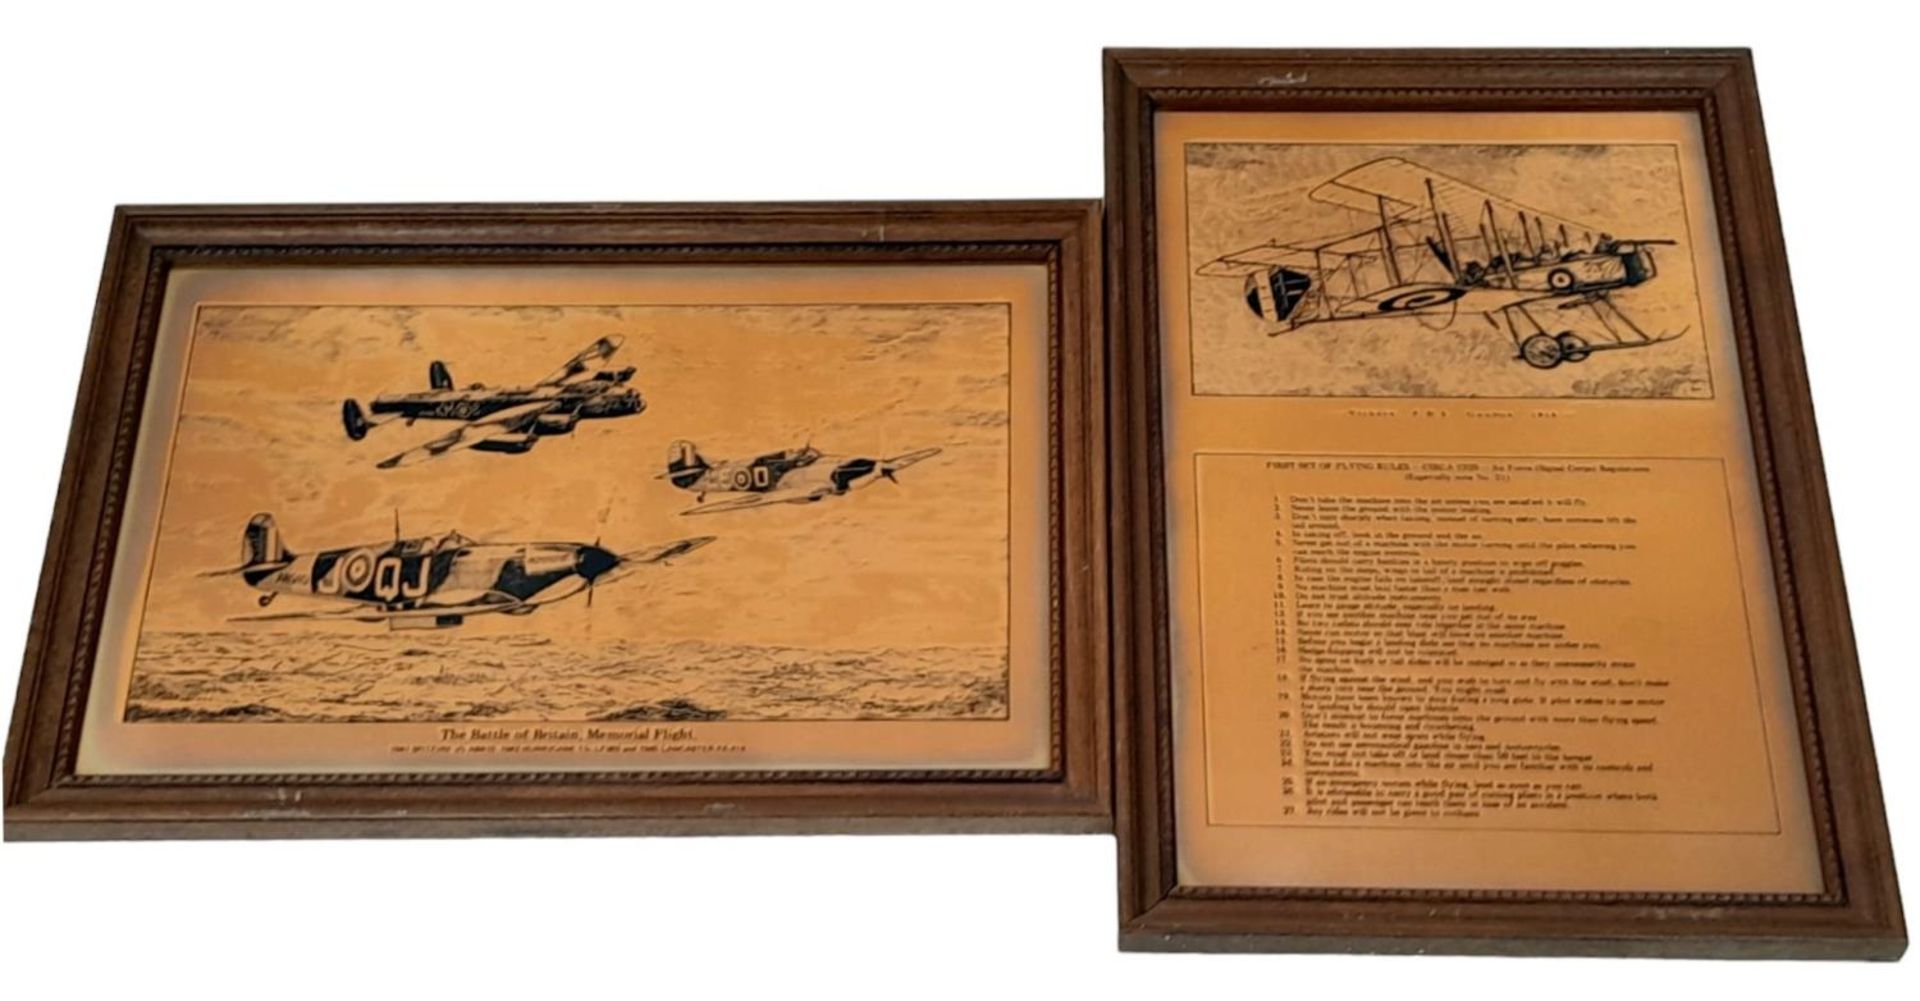 Two Copper Plated Etched Pictures Depicting Aircraft. In frame - 32 x 49cm.